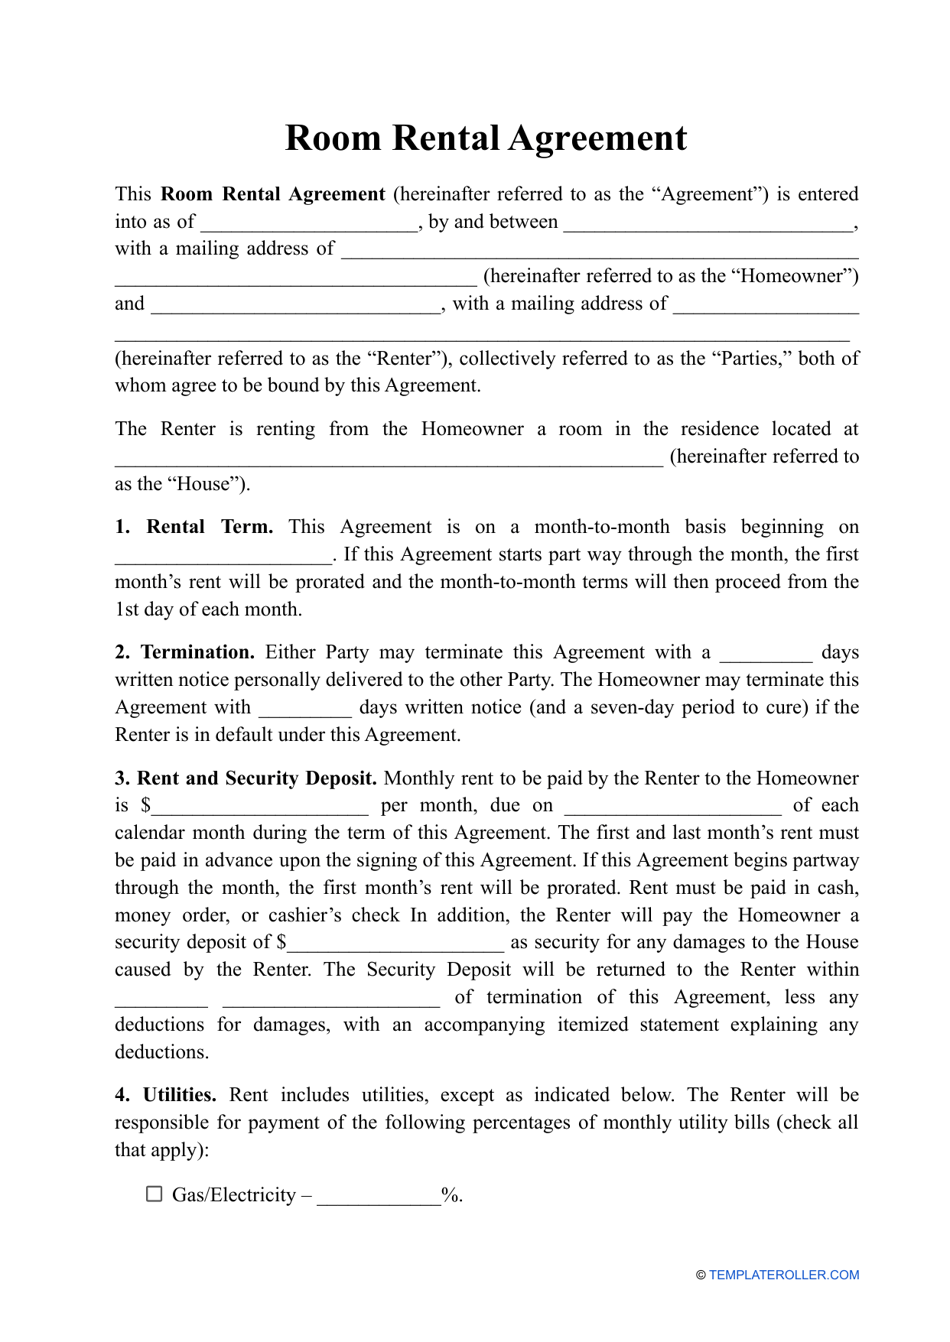 Room Rental Agreement Template - Nine Points, Page 1